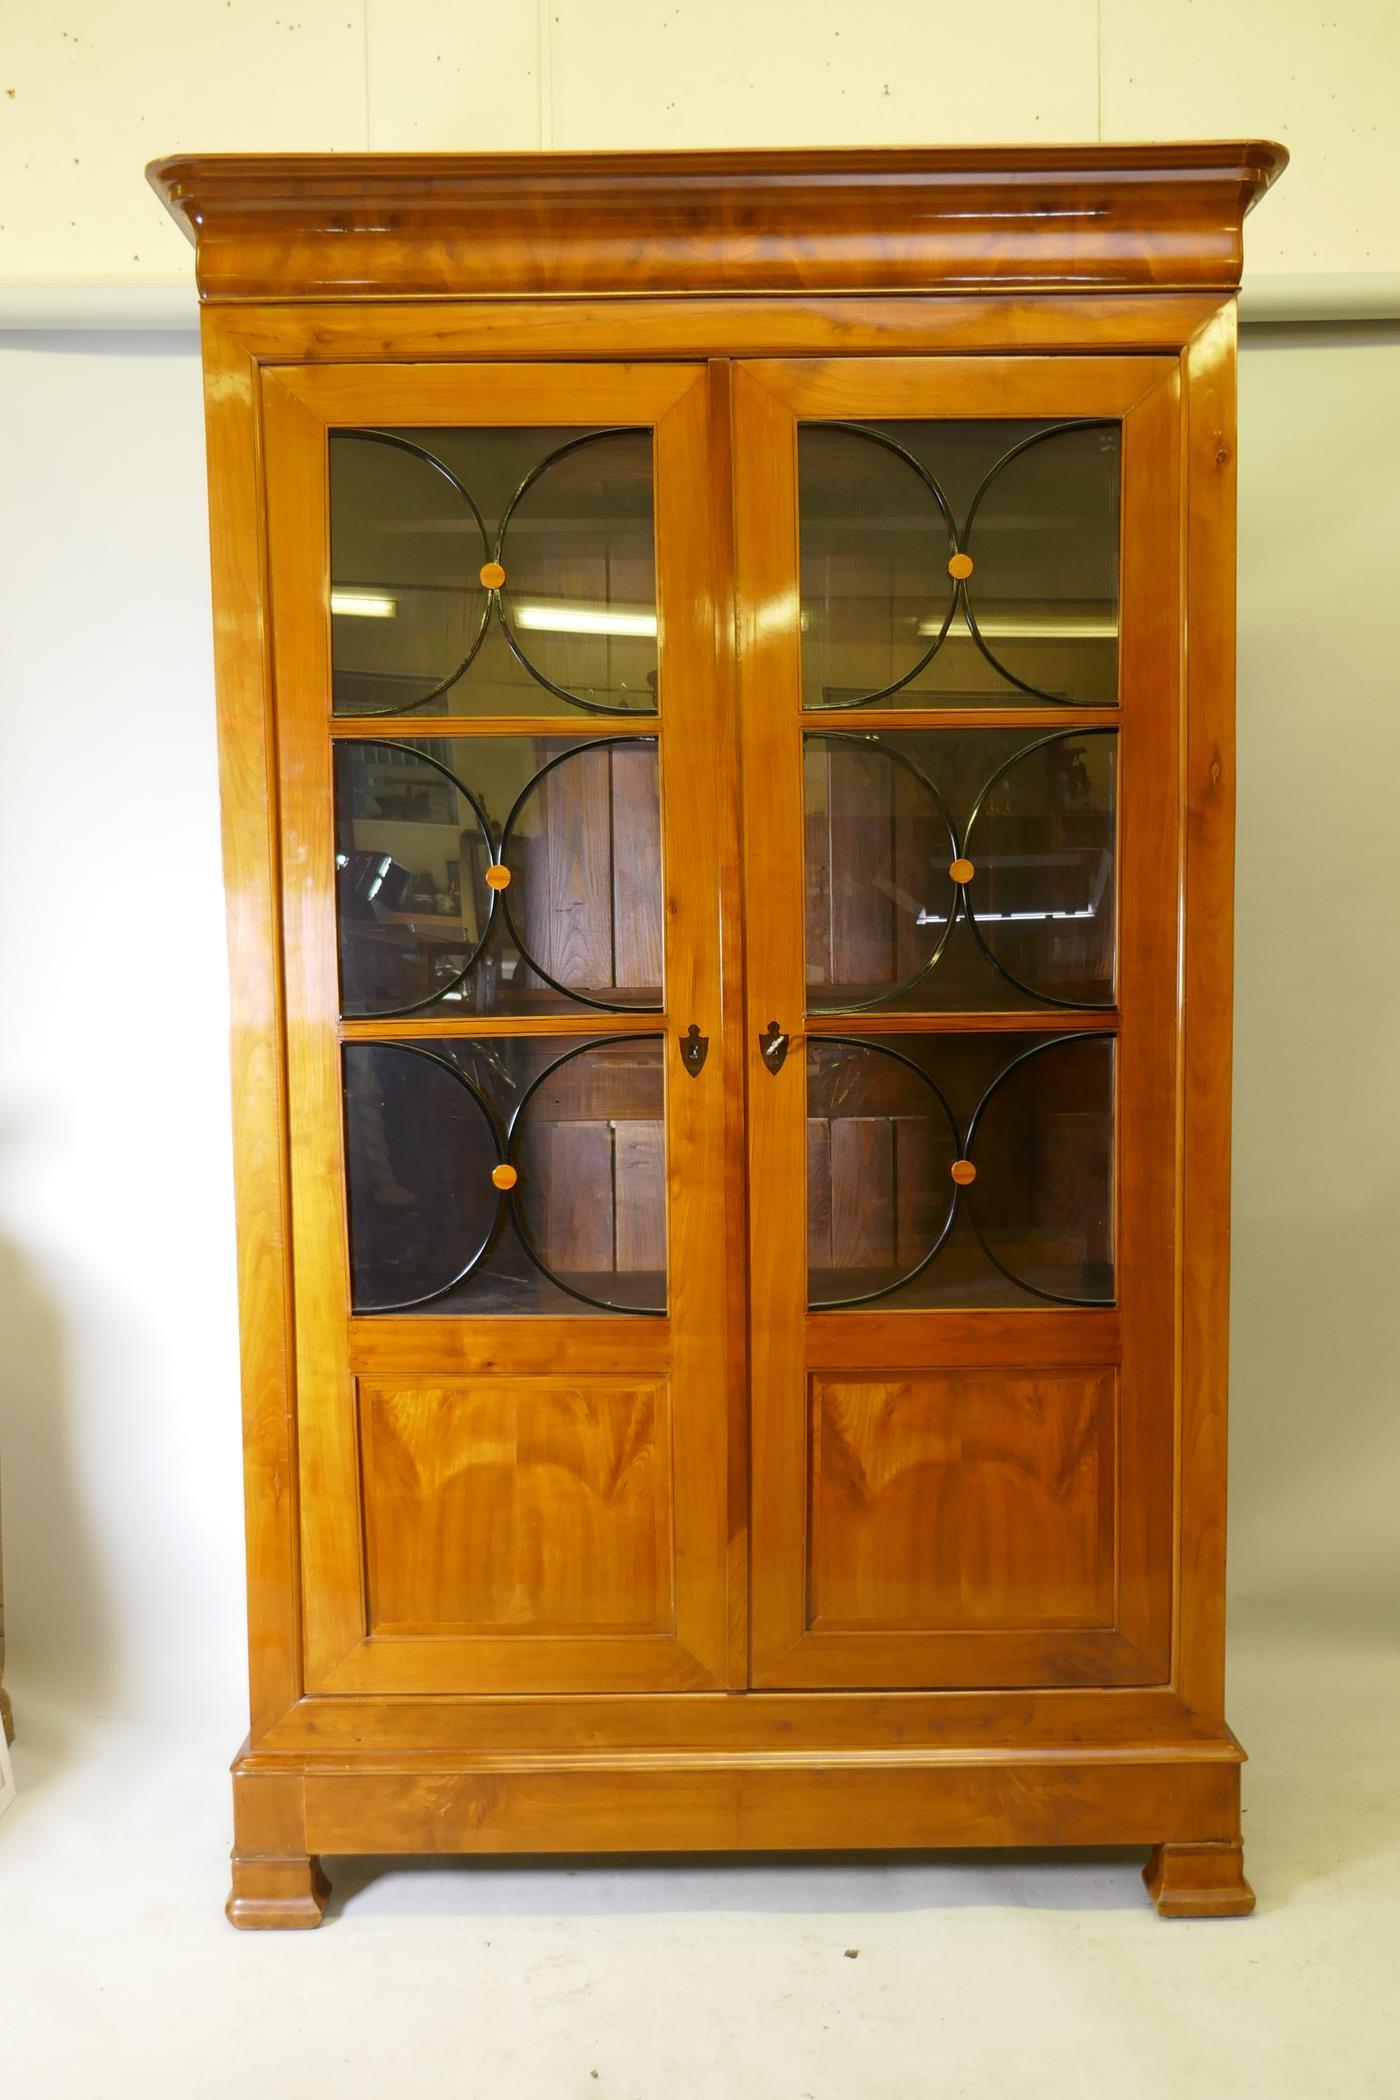 A C19th Continental Biedermeier style fruitwood armoire, with ebony stringing, the doors later